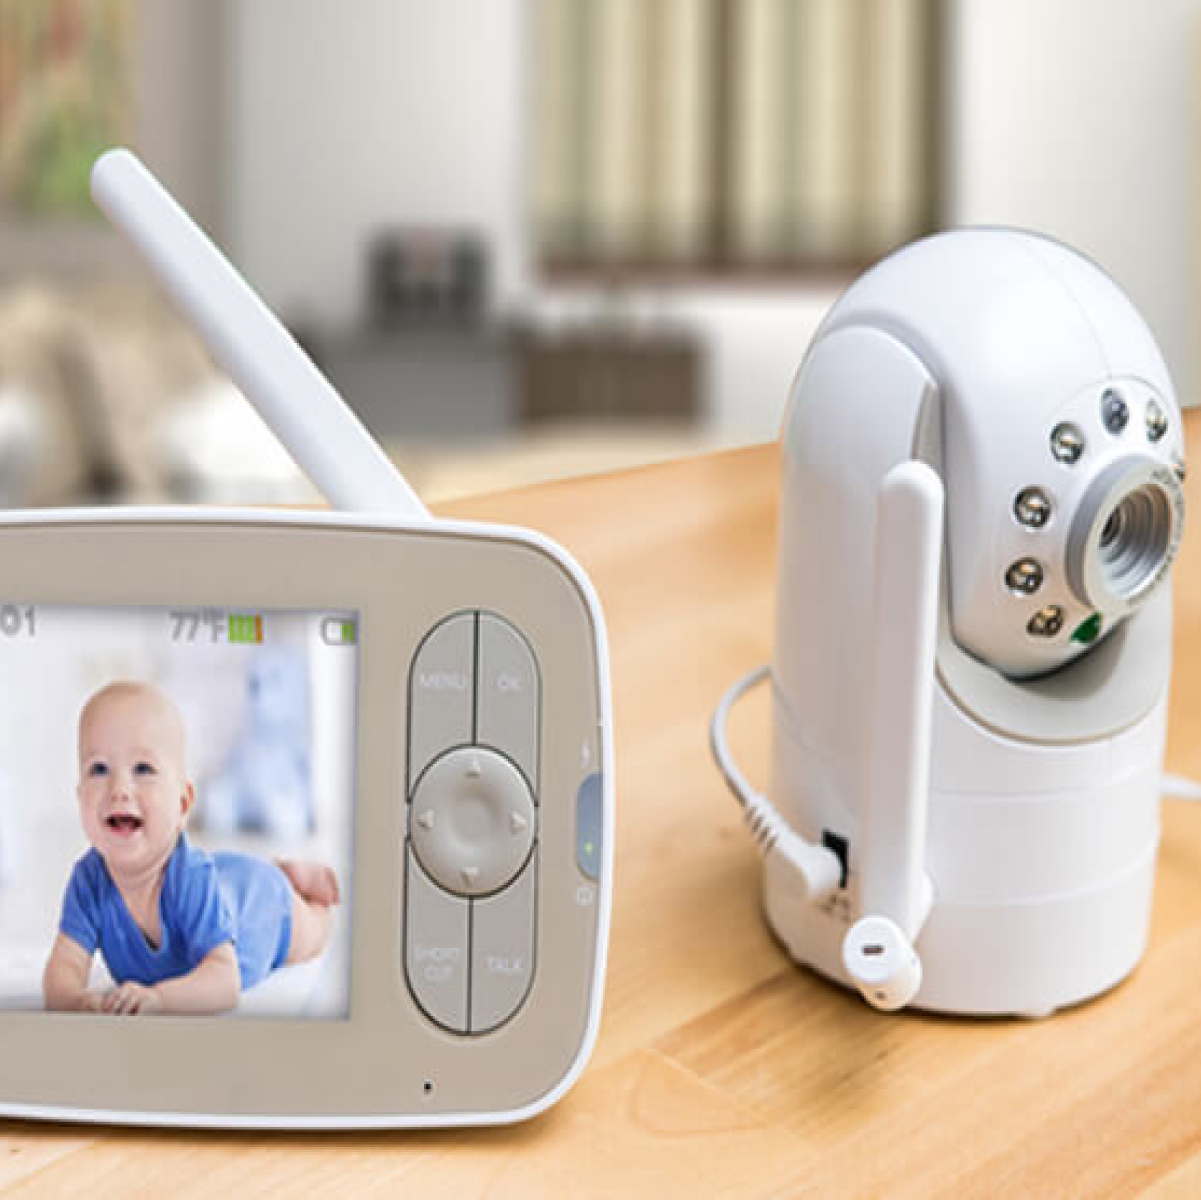 Intelligent Baby Monitoring System using Image Processing